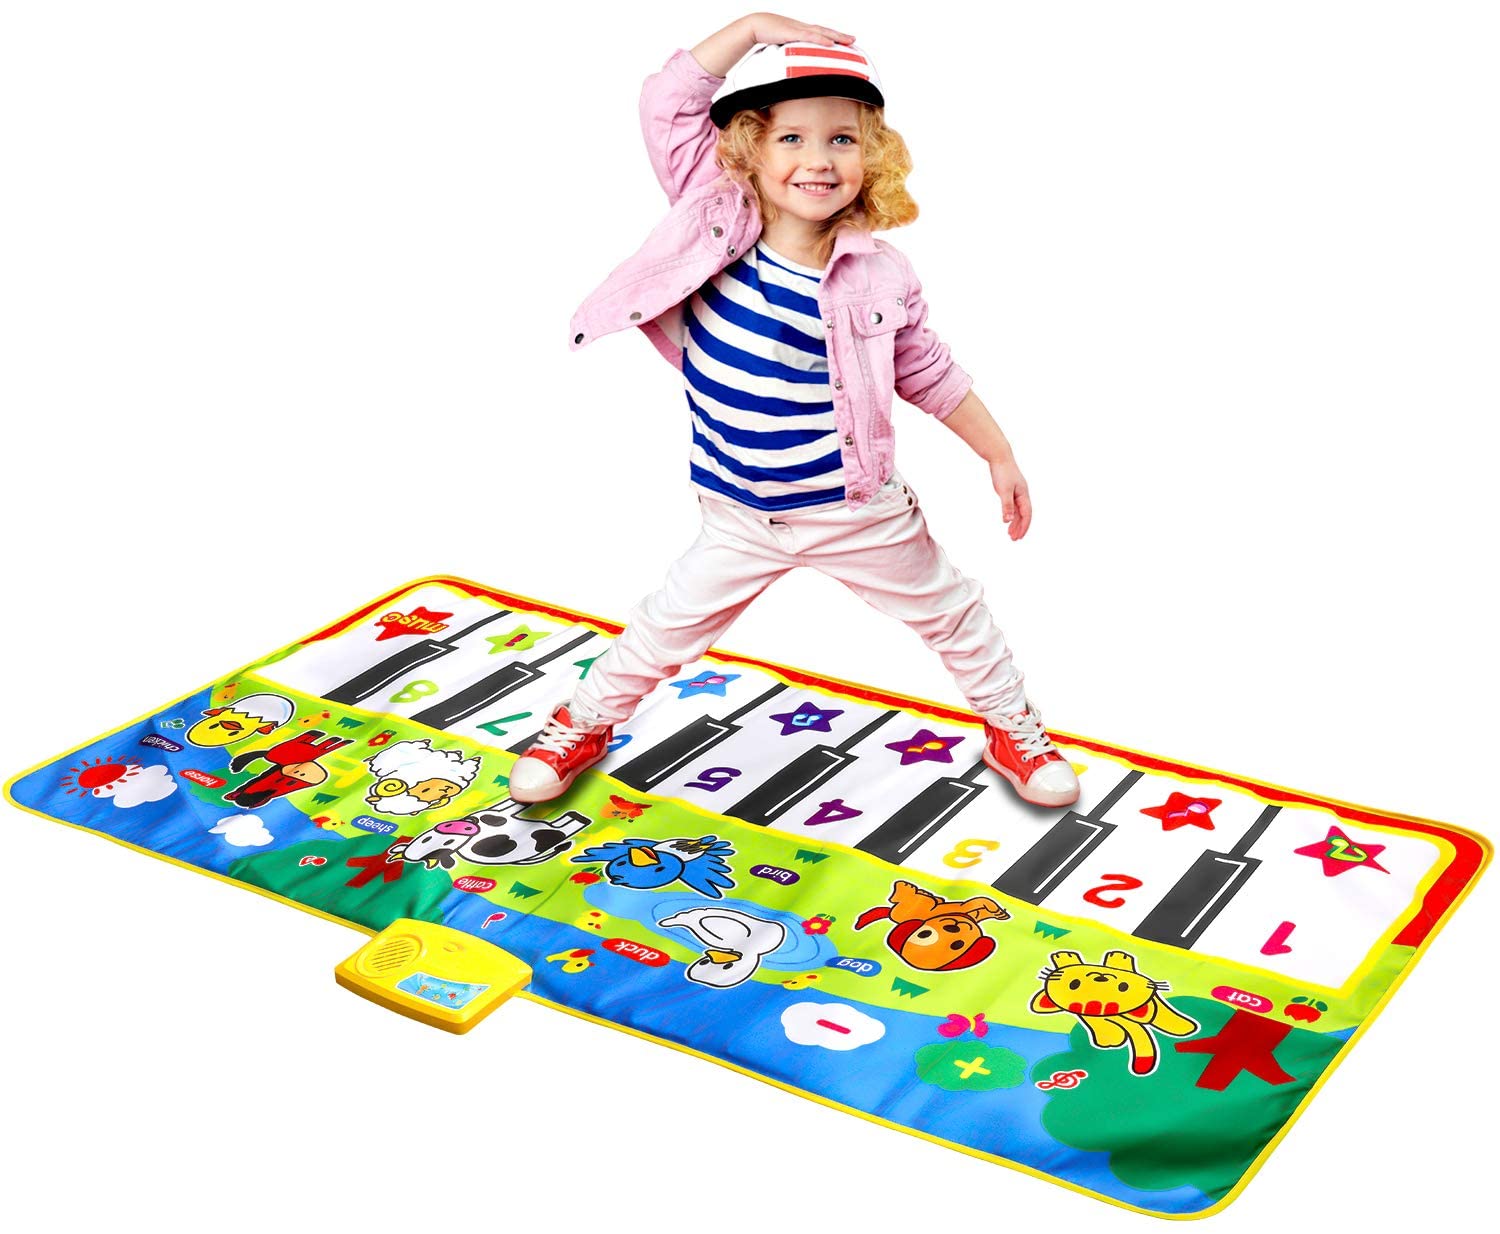 acplaypen Music Mat for Kids, 53" x 23" Kids Piano Mat Touch Play Musical Keyboard Mat with 8 Animal Sounds Educational Piano Floor Mat Toys Gift for Boys Girls Ages 3-10